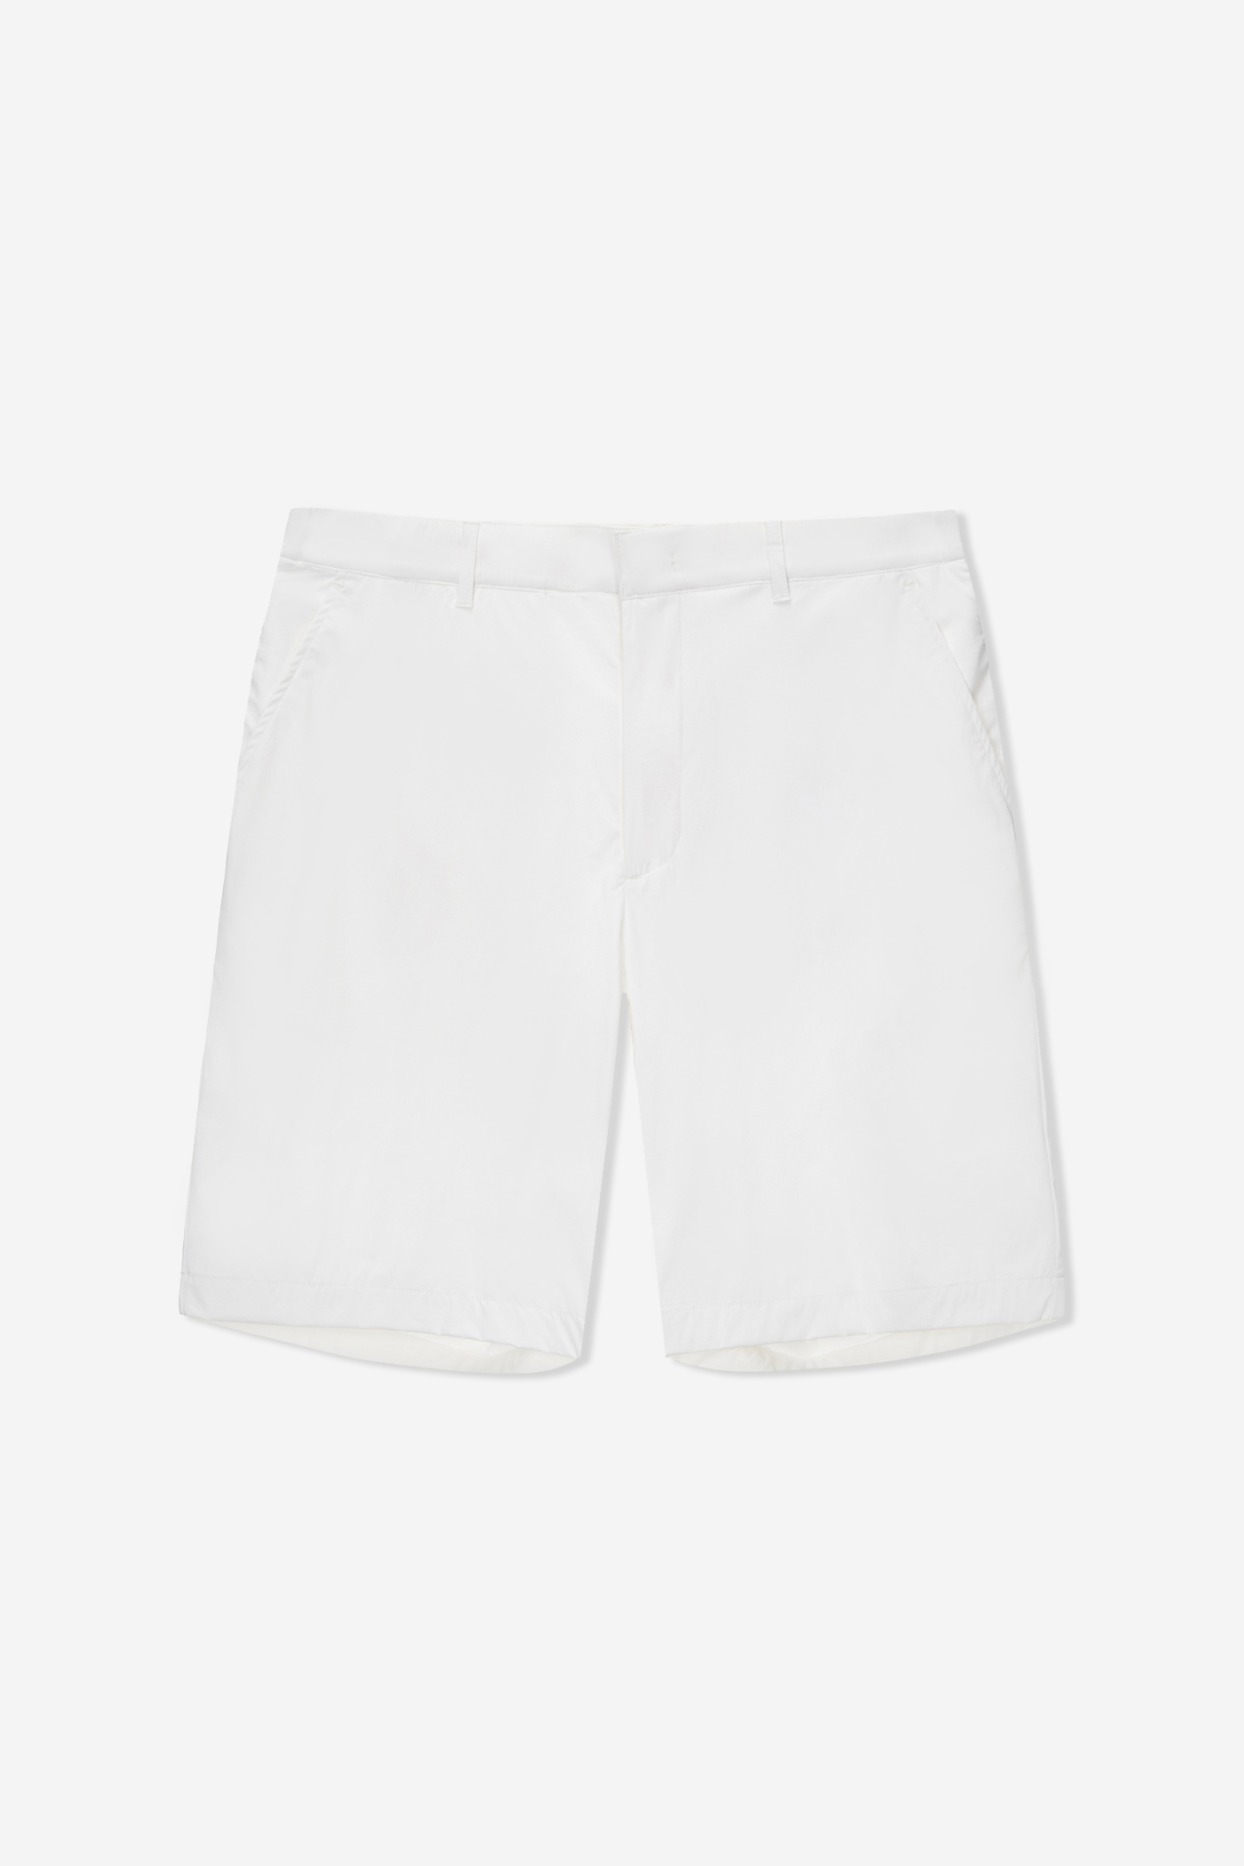 M CLASSIC PERFORMANCE SHORTS OFF WHITE